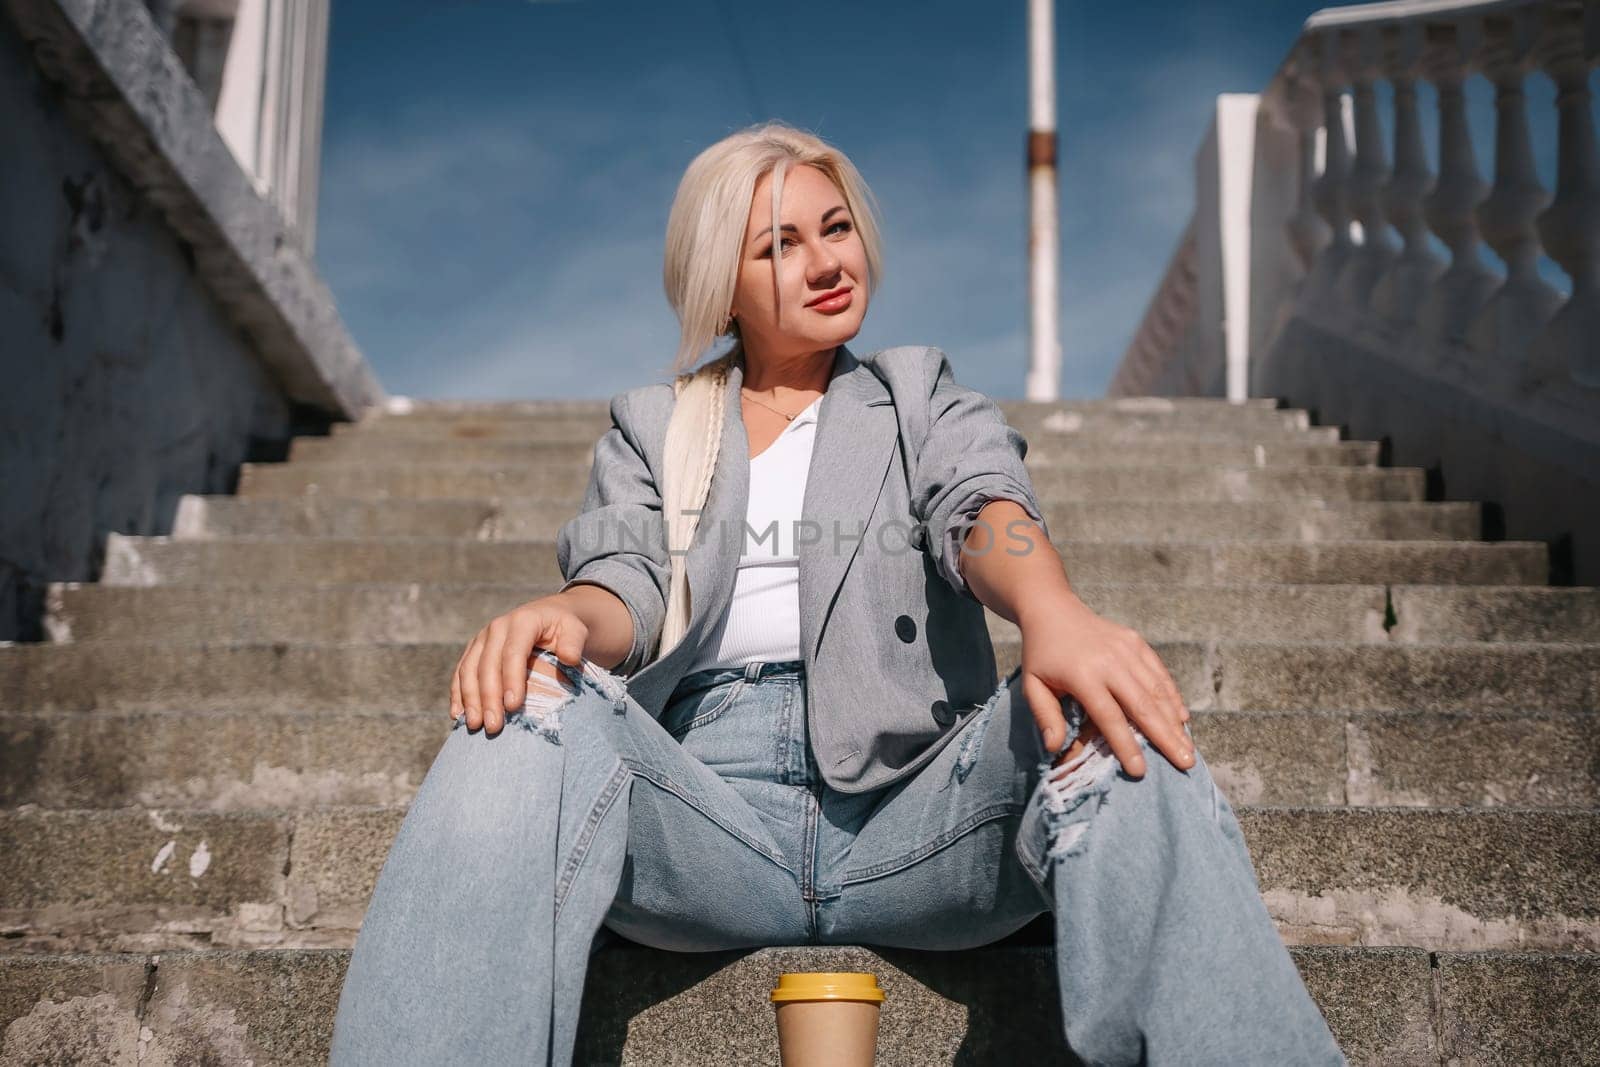 A woman in a gray jacket and blue jeans sits on a set of stairs. She is smiling and she is enjoying herself